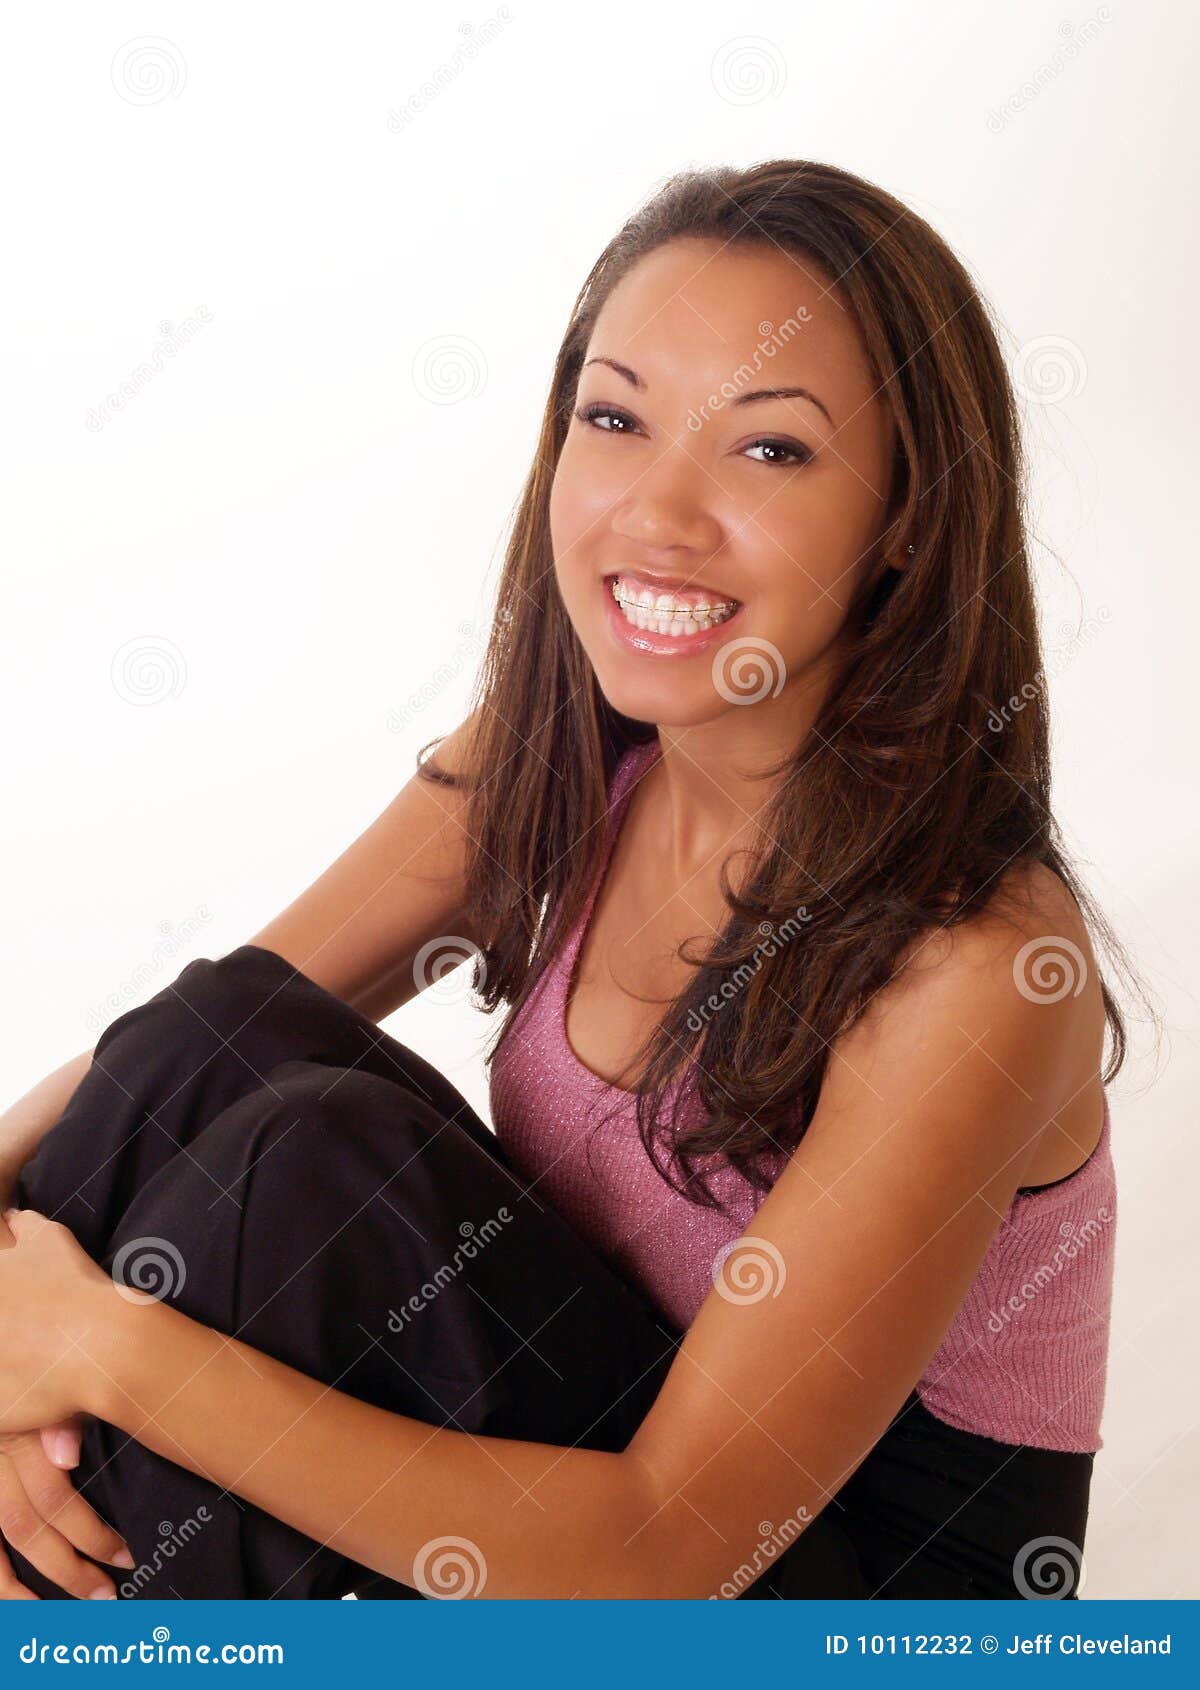 Smiling Black Woman With Braces On Upper Teeth Sto